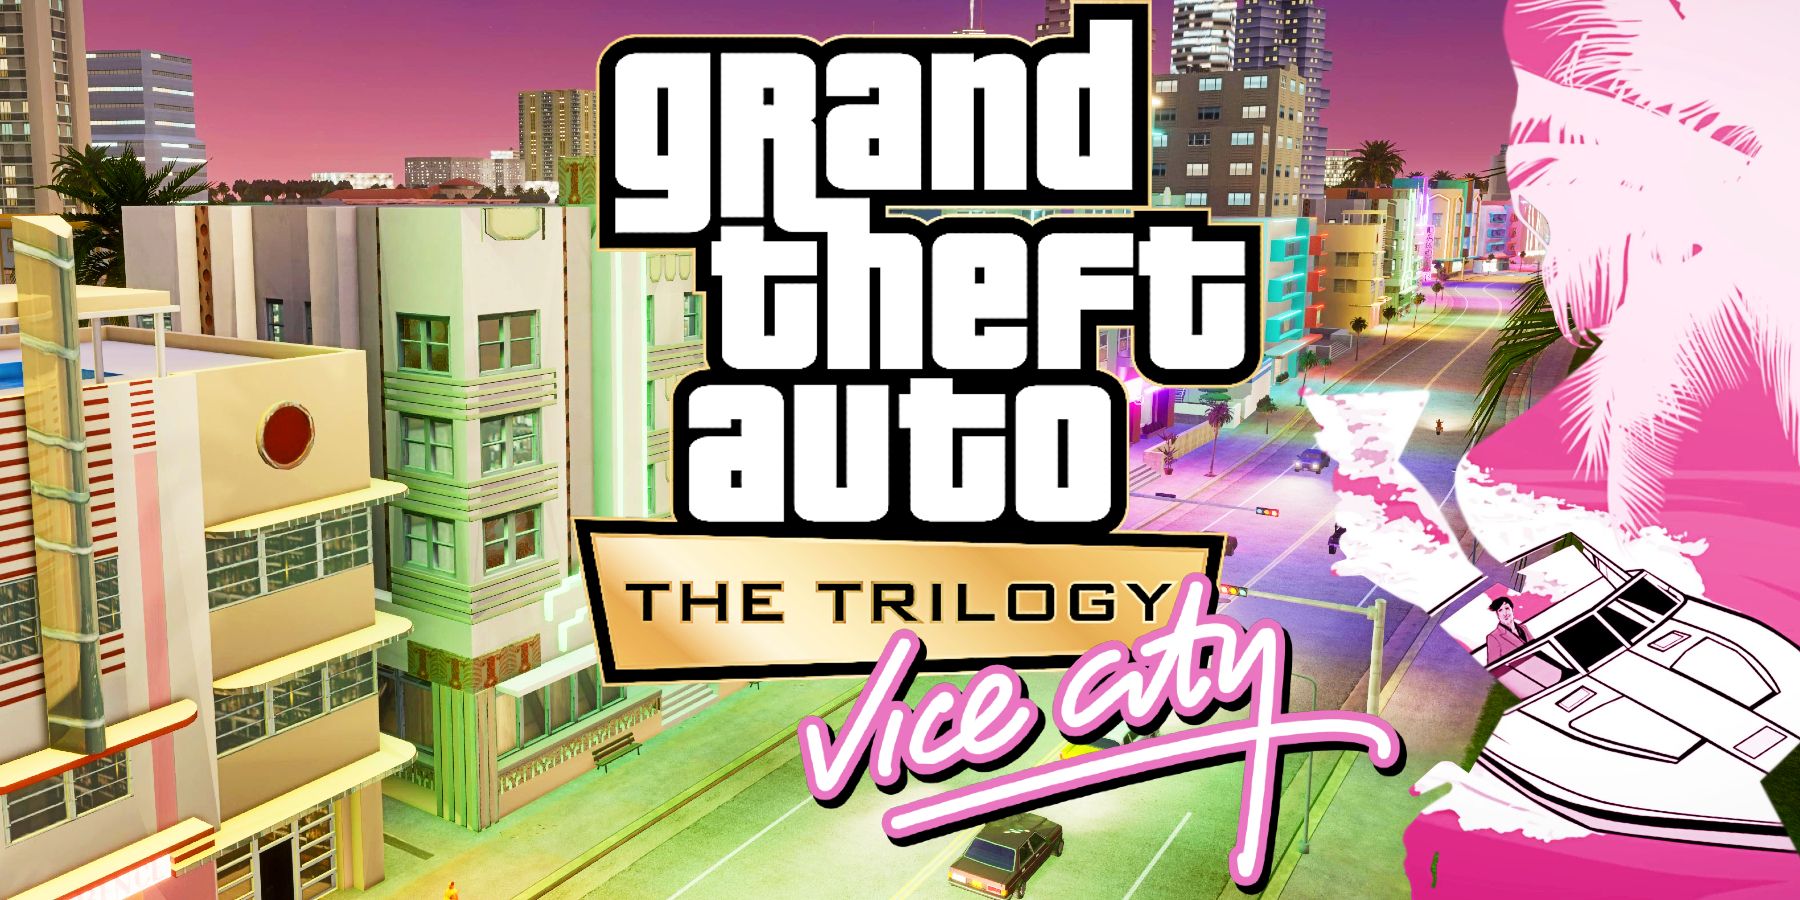 list of missions in gta vice city mobile